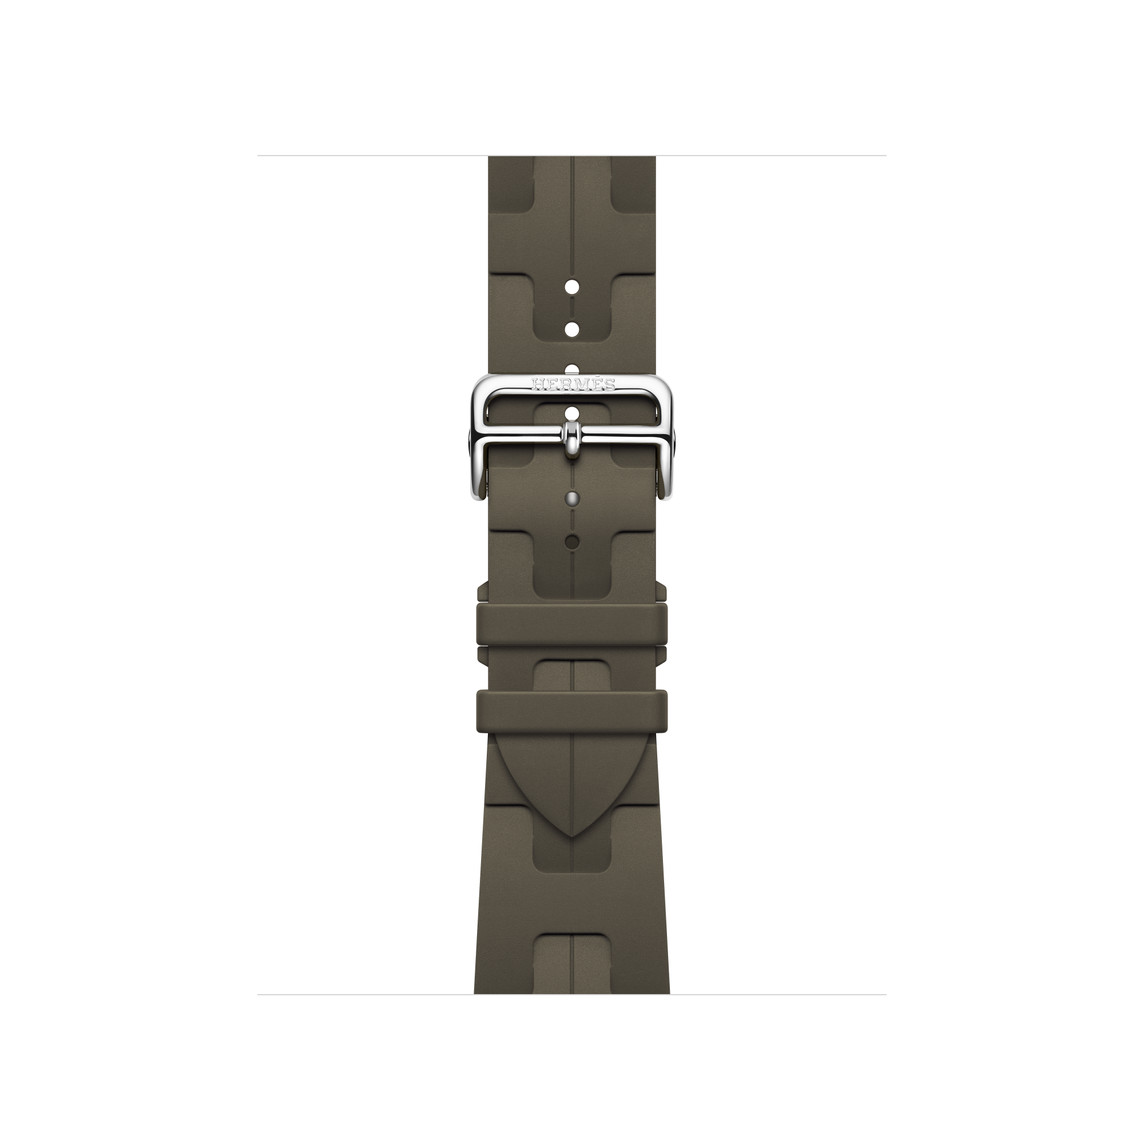 Kaki (greenish brown) Kilim Single Tour band, supple leather with black stainless steel buckle.